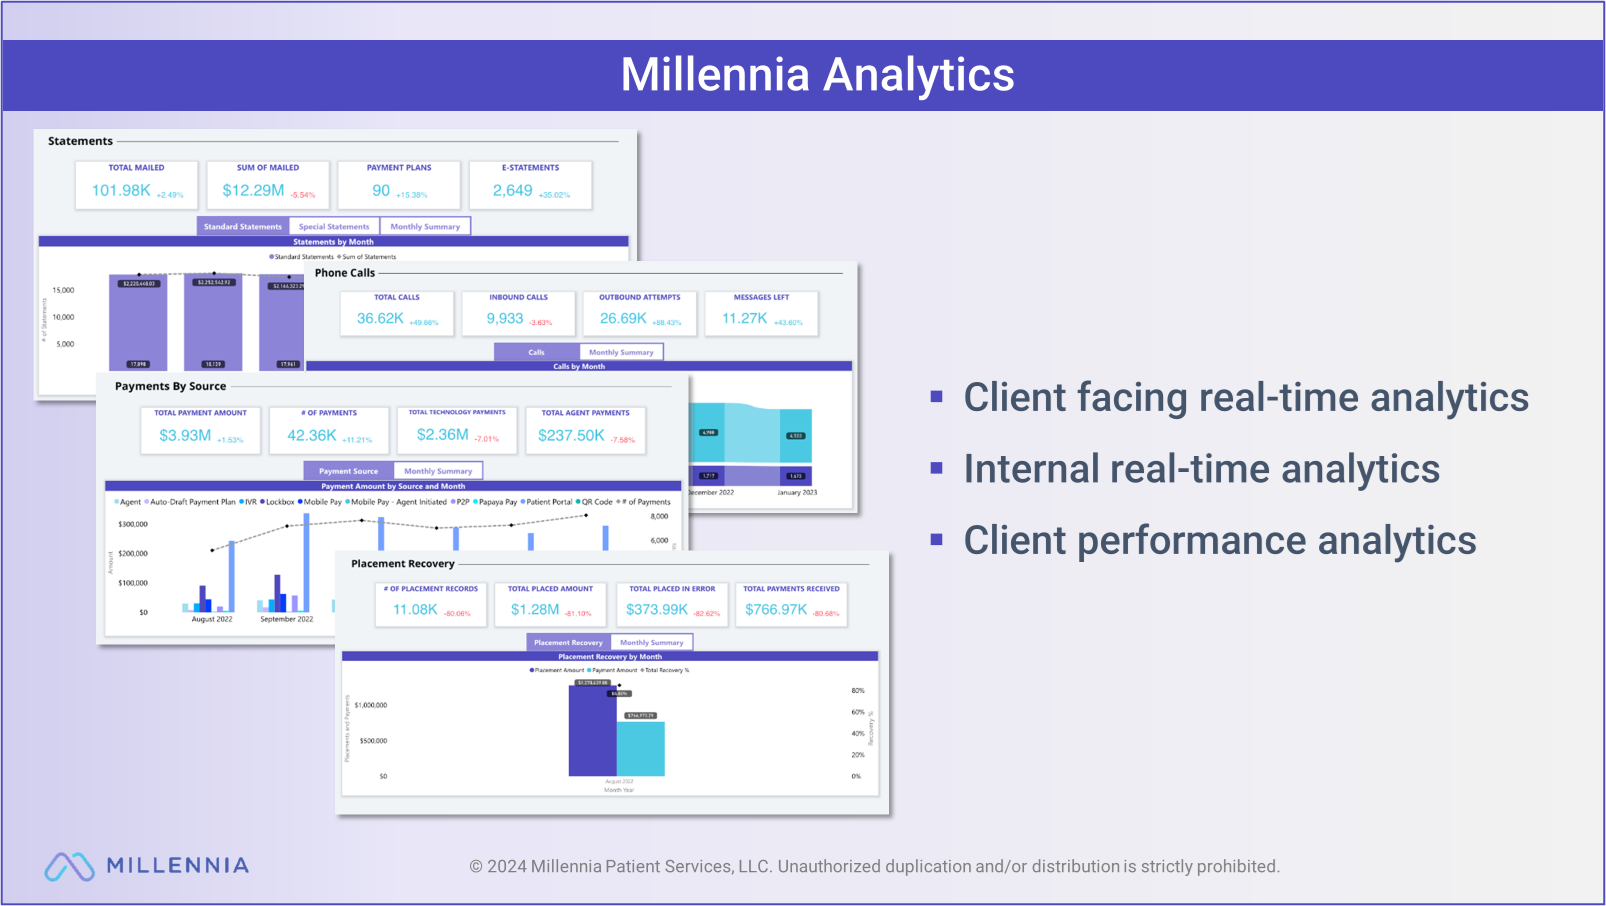 Millennia analytics - client facing real time analytics, initial real time analytics, client performance analysis